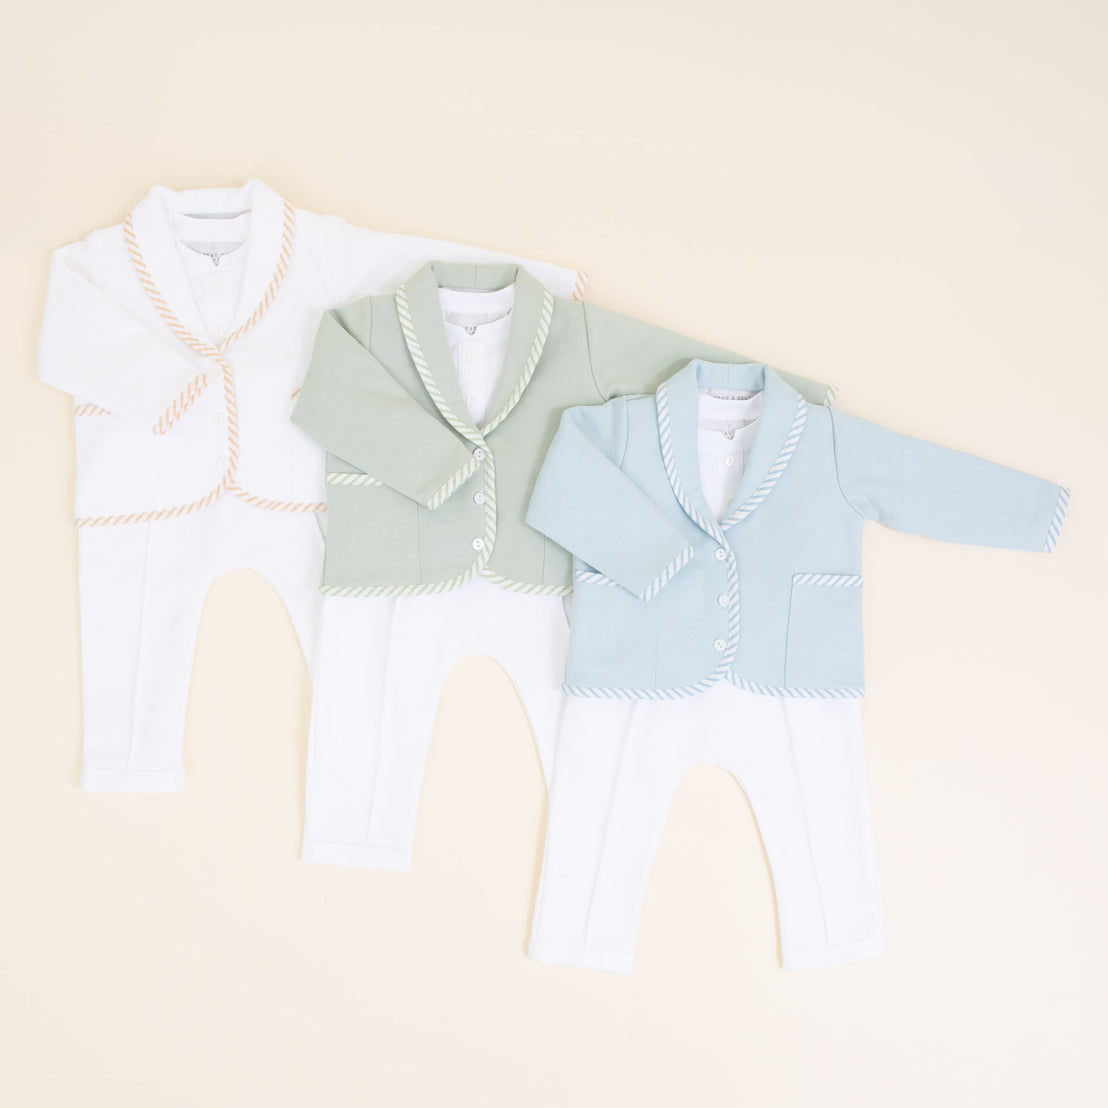 Flat lay photo of three different Theodore 3-Piece Suits, including the colors tan, green, and blue.